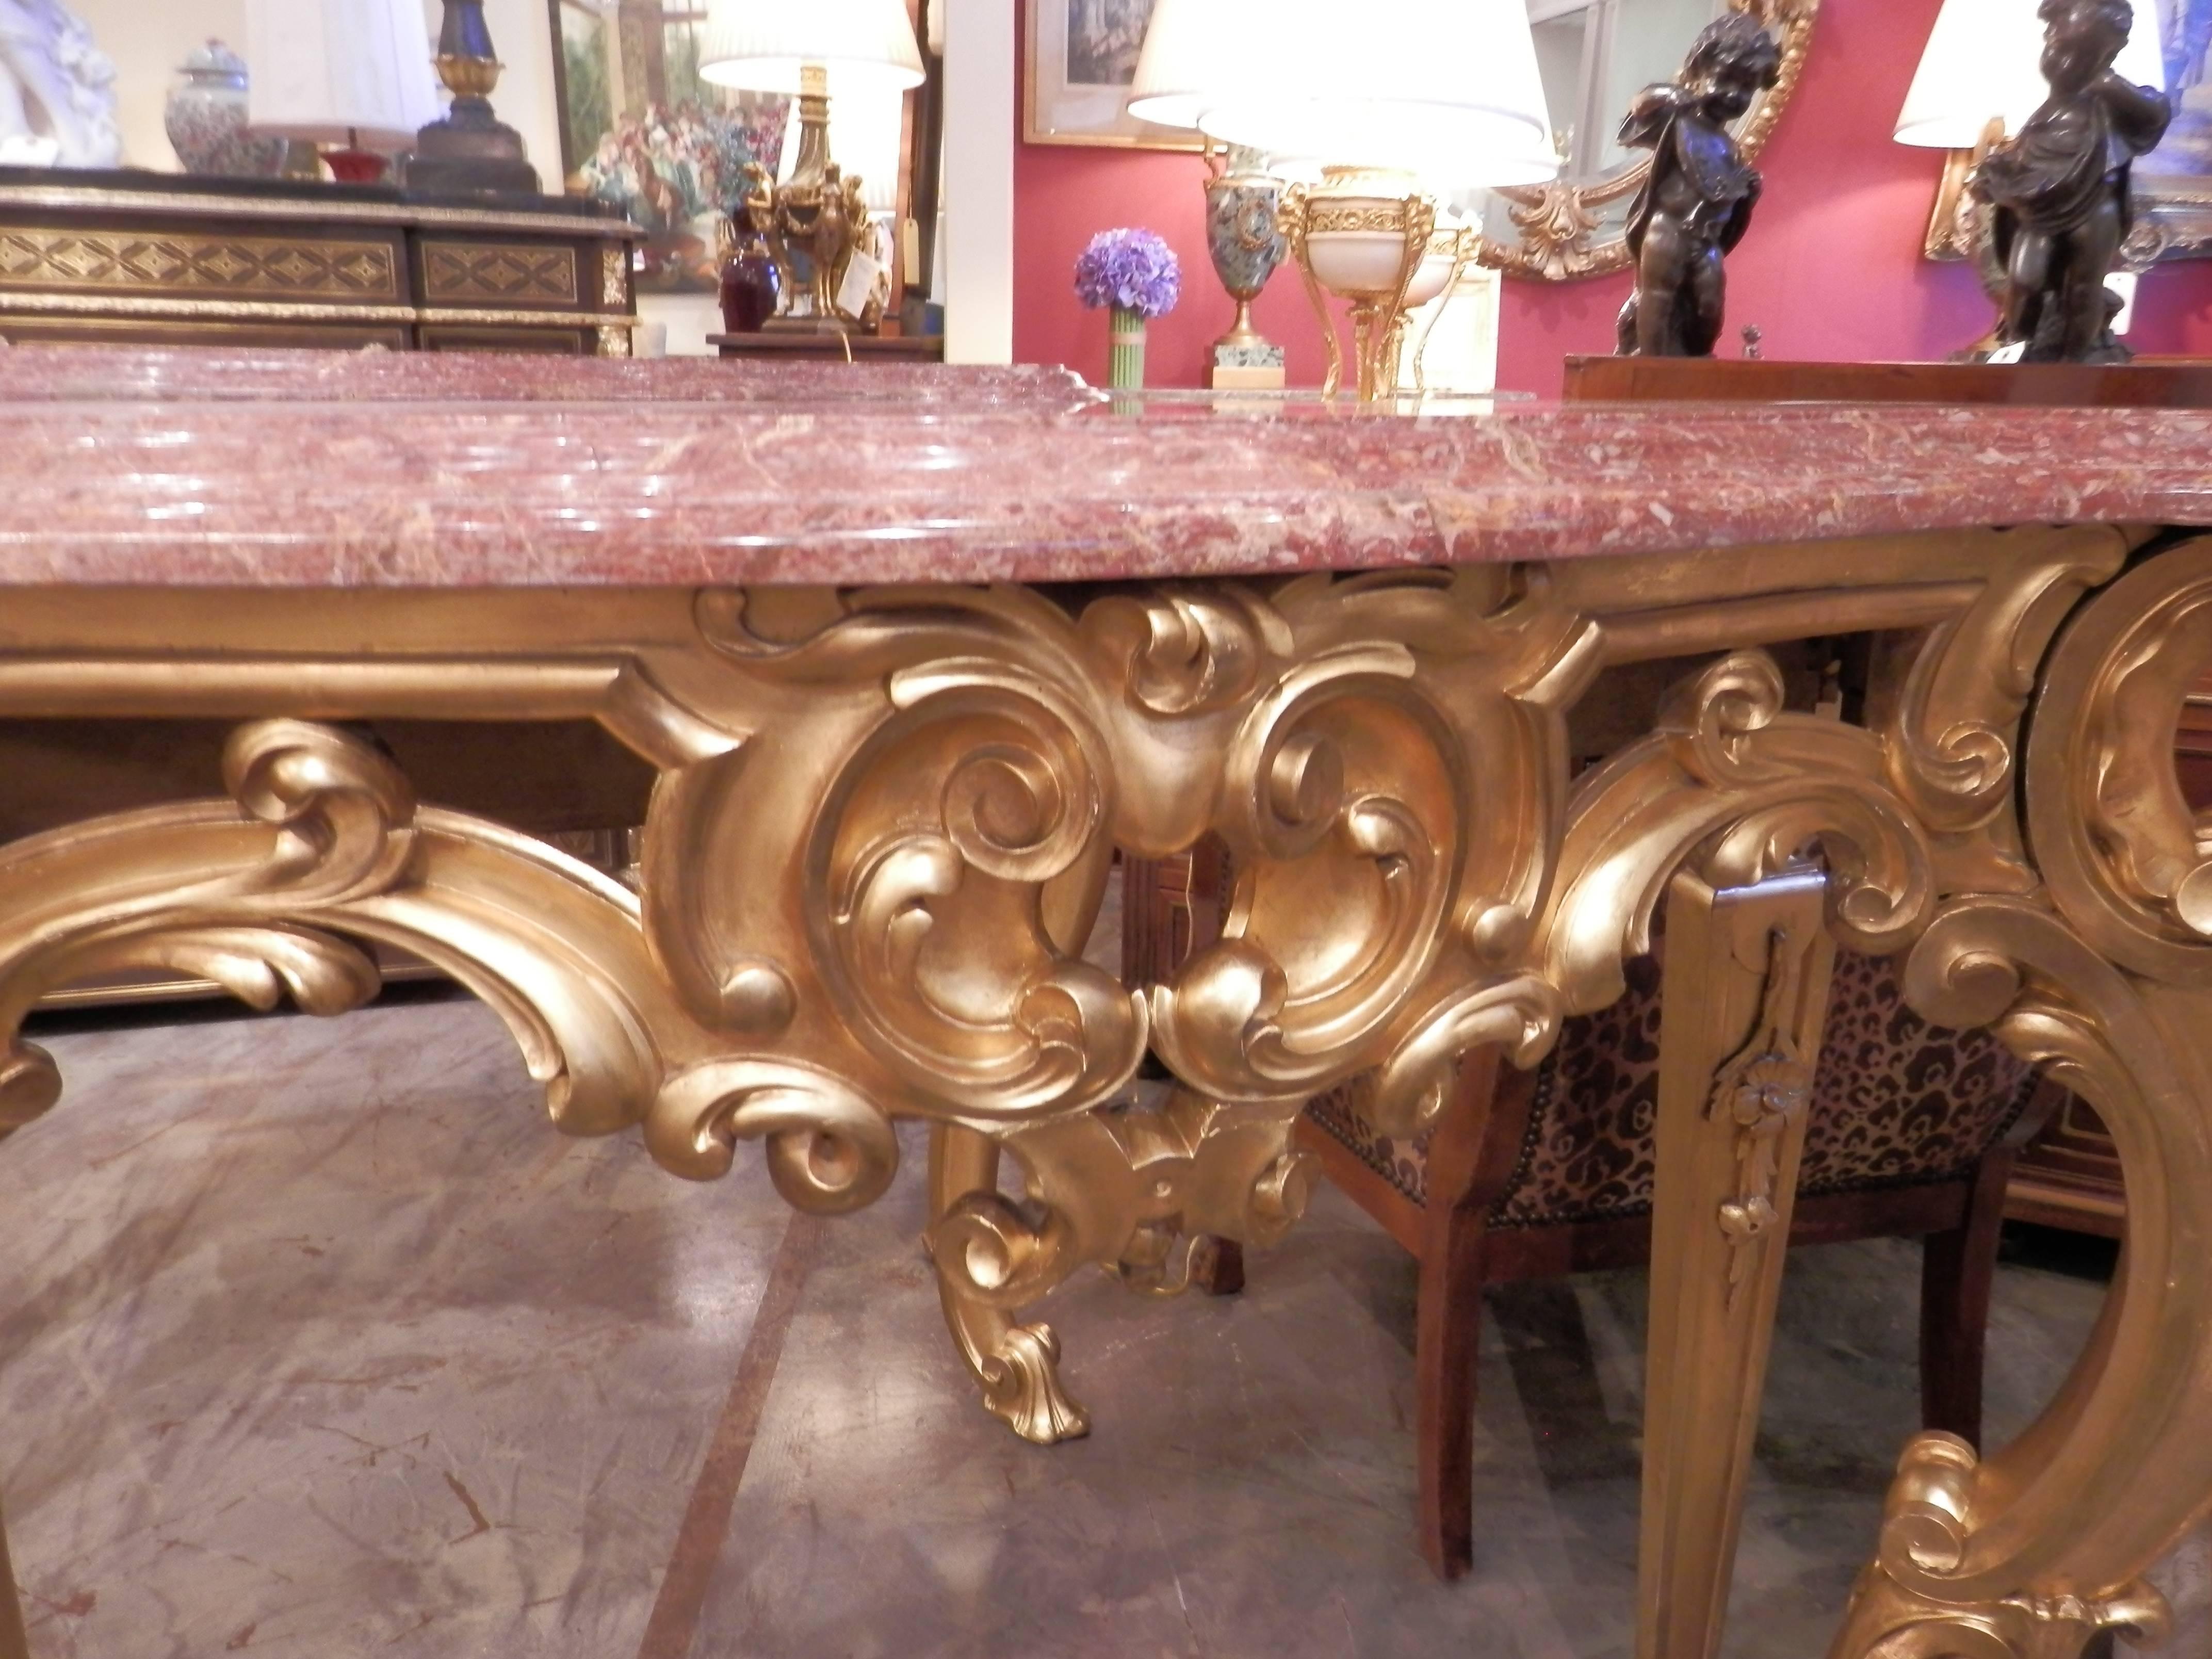 Pair of 19th century French Louis XV water gilt Rococo hand-carved consoles. Beautiful Empire red marble tops. Fine carved original water gilding.
 